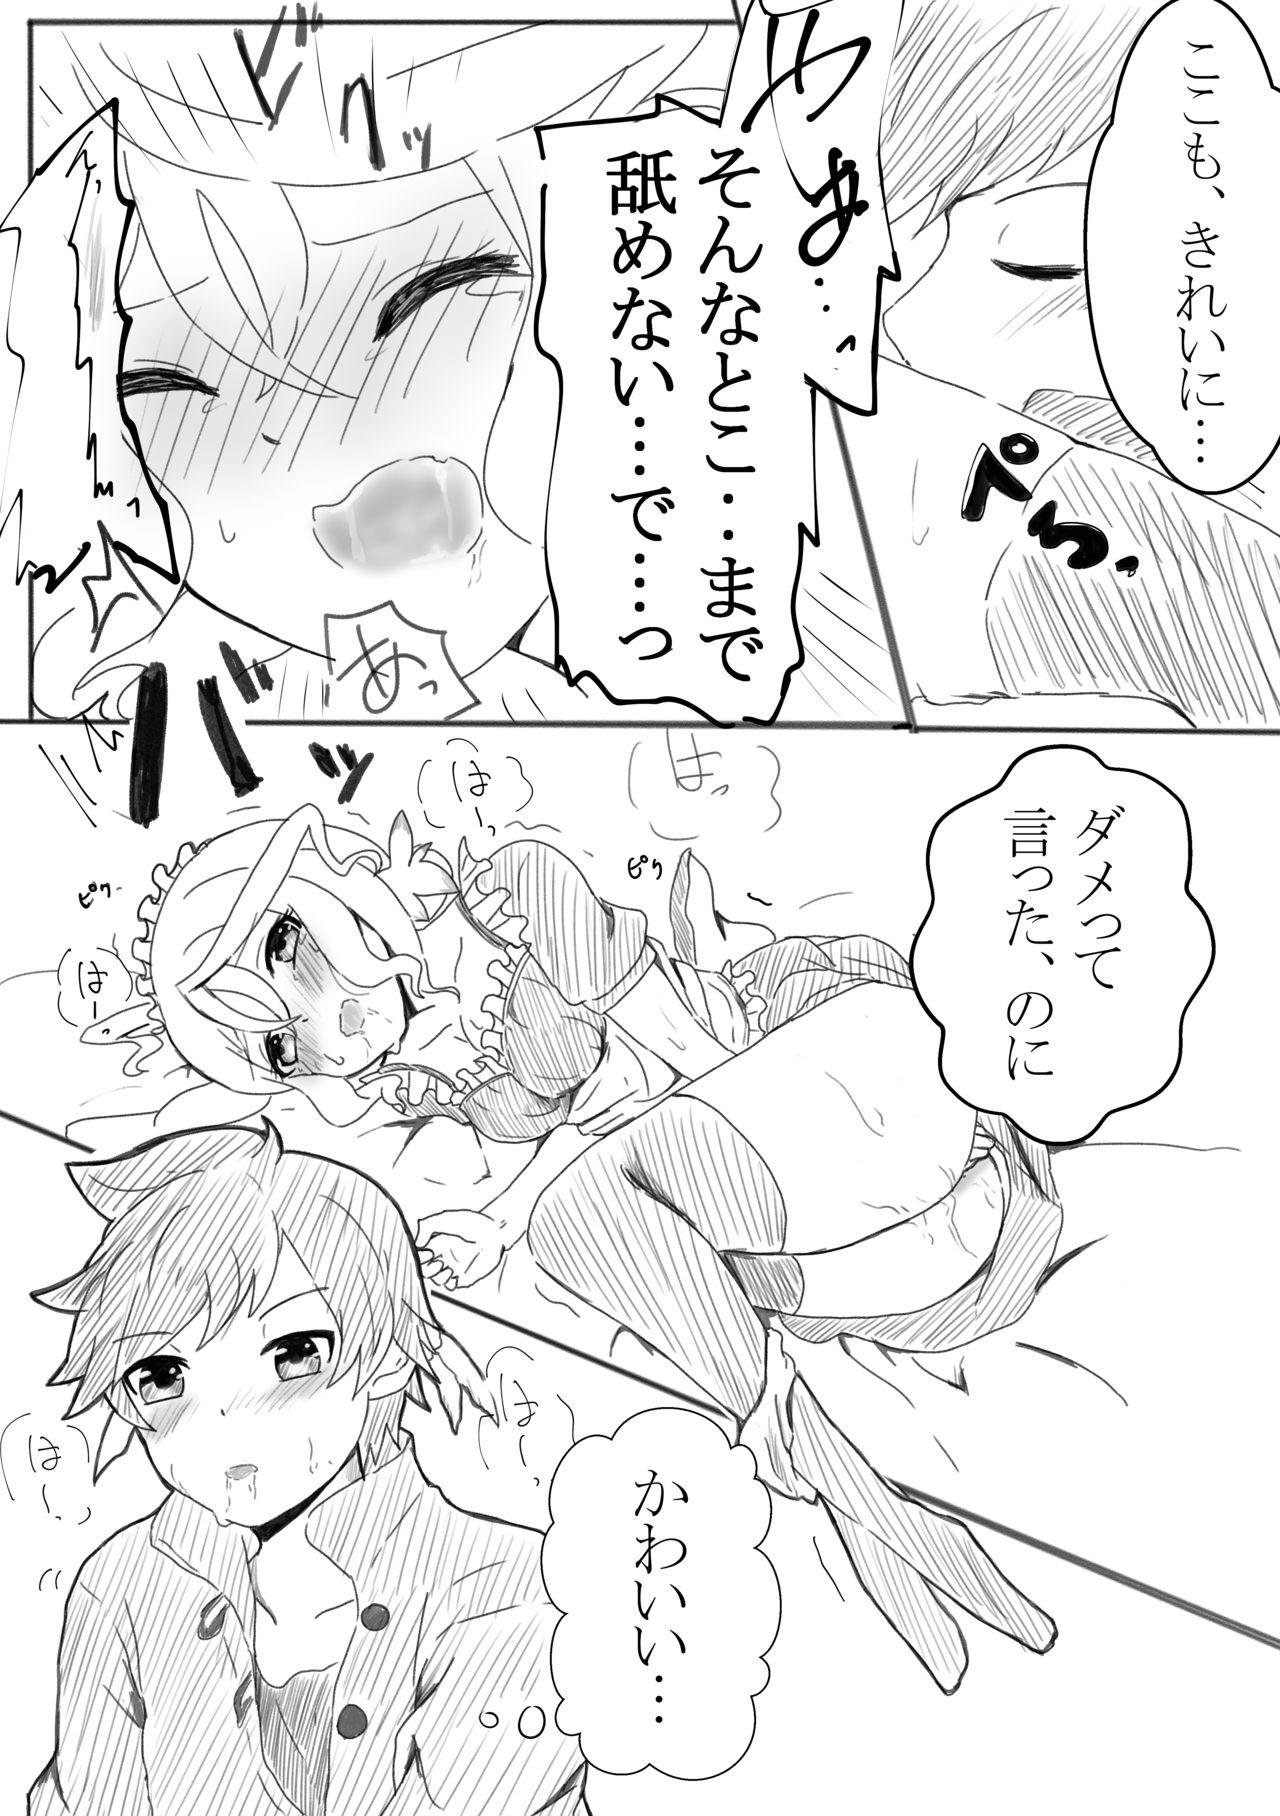 Fuck Her Hard アリーシャで癒して？ - Tales of zestiria Wanking - Page 9